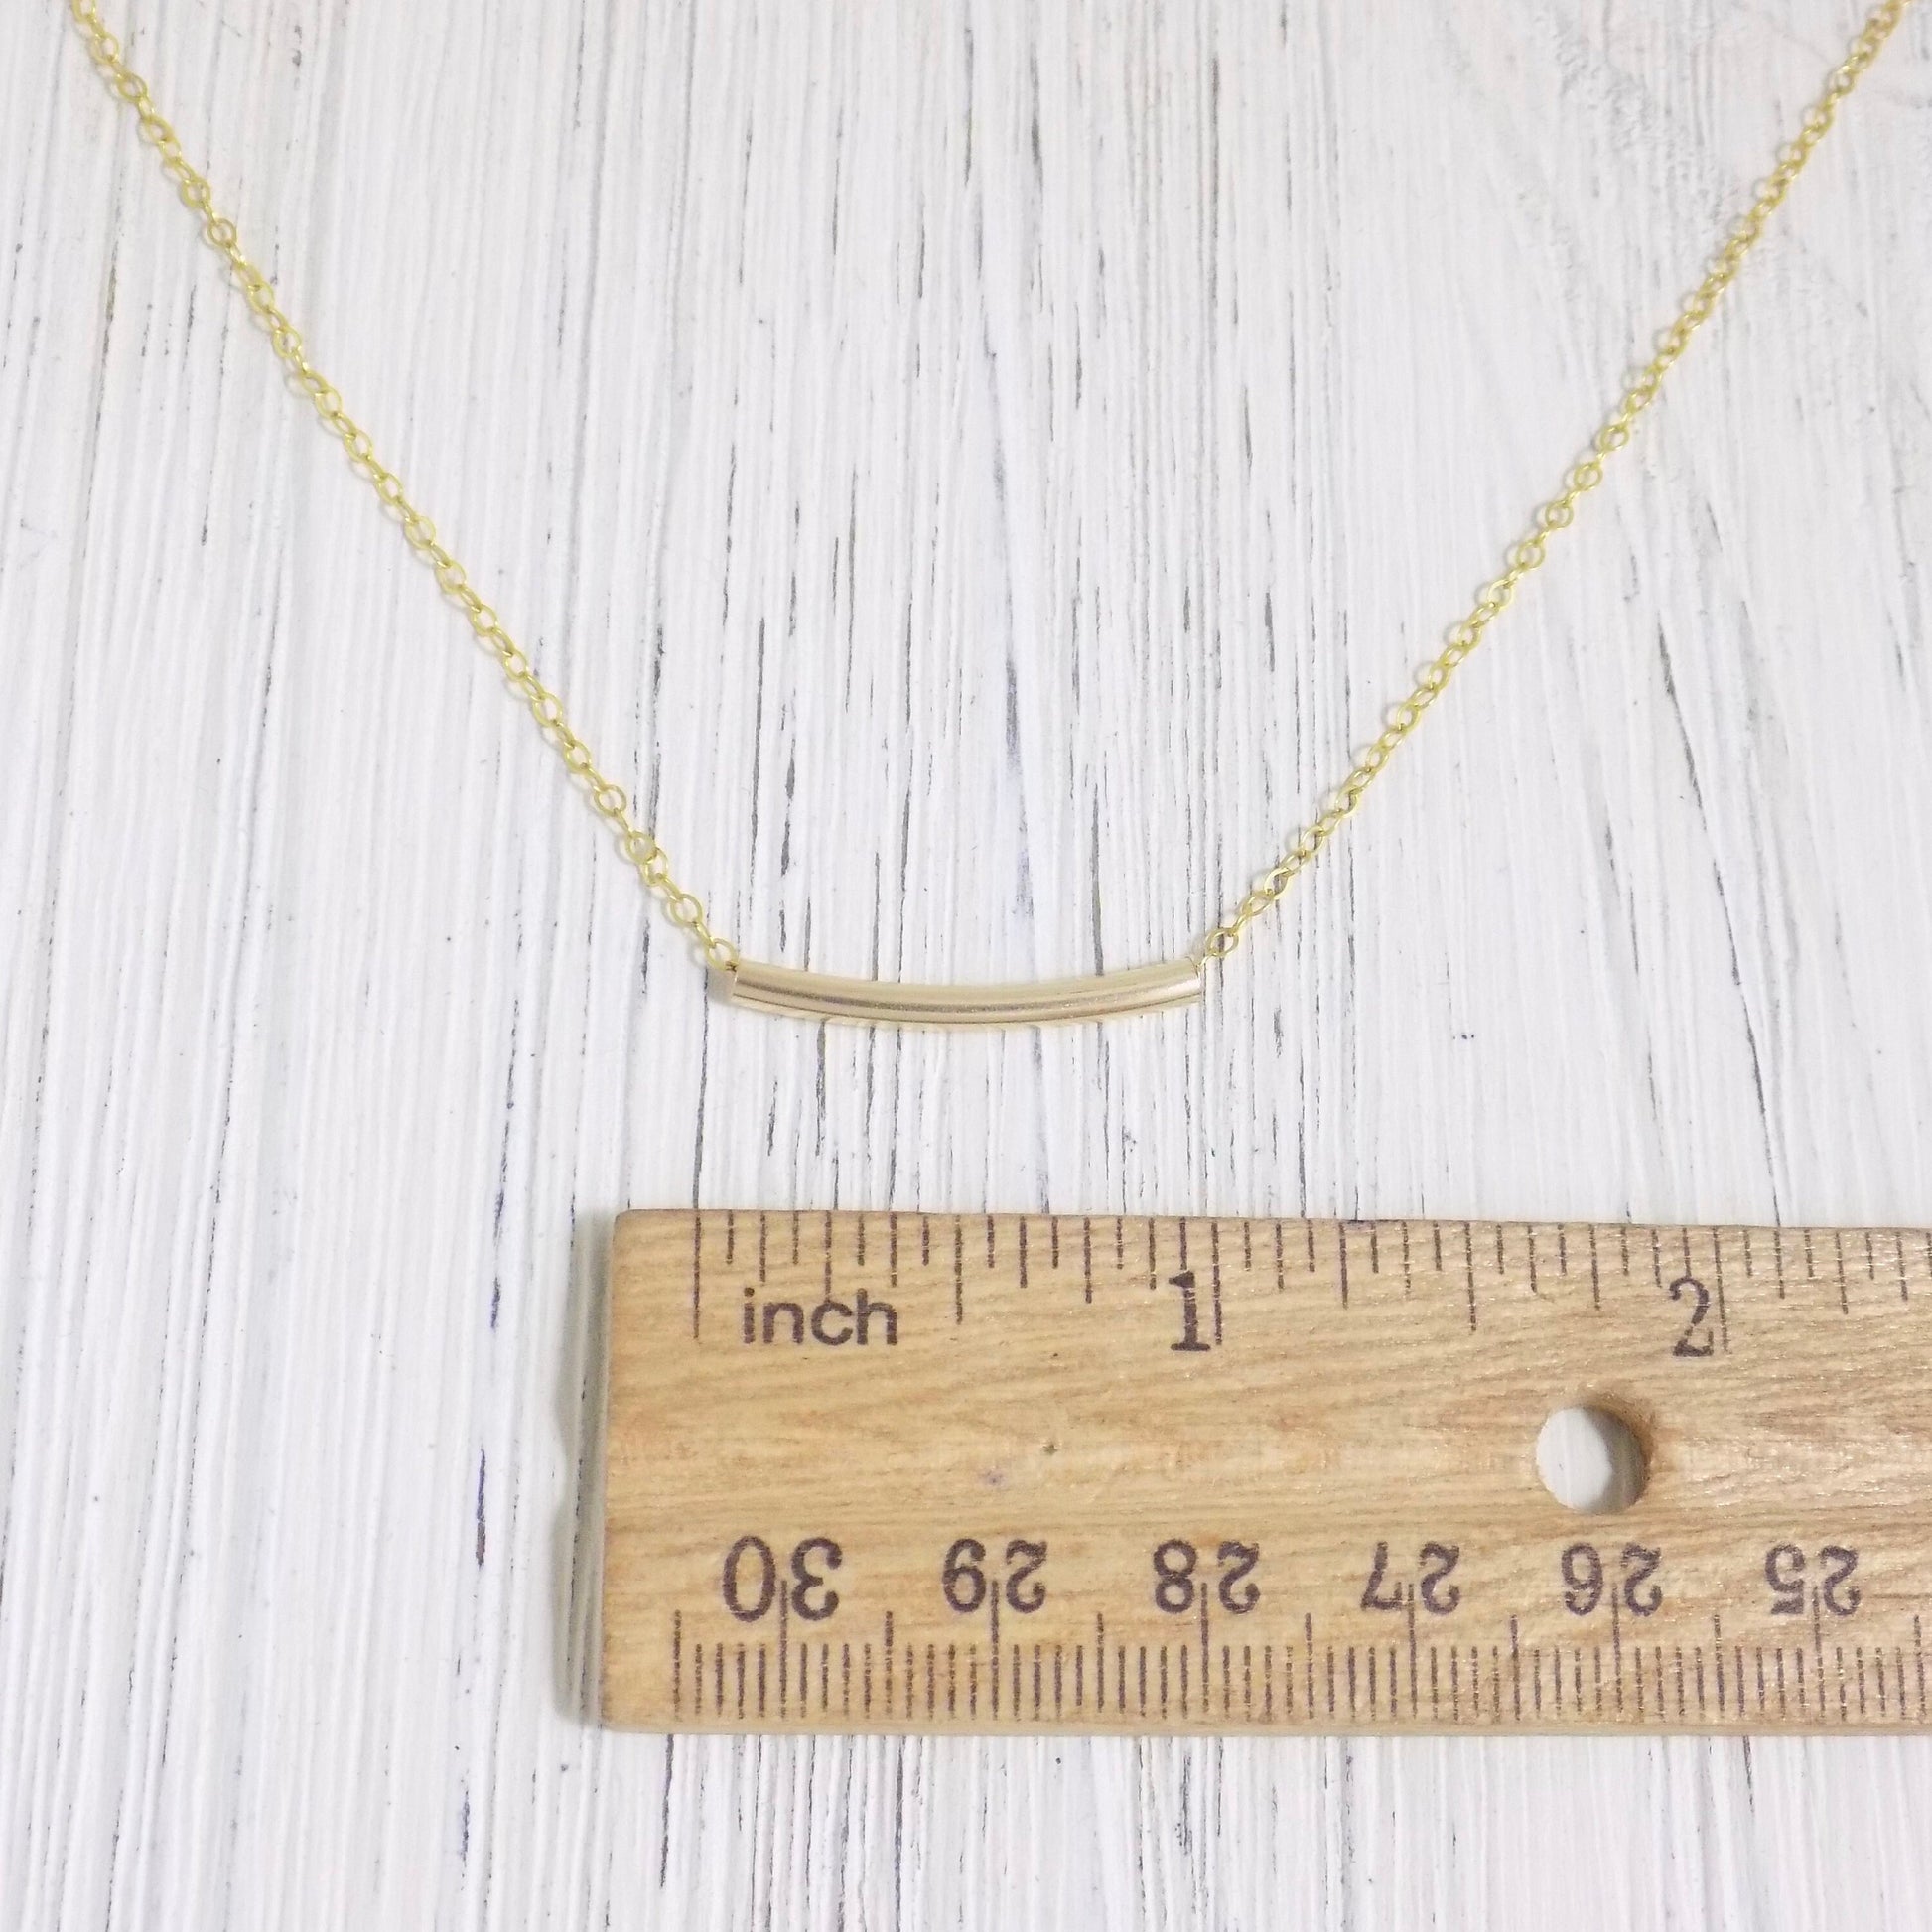 14K Gold Filled Simple Everyday Curved Bar Necklace, Minimalist Layering, Gift For Women, Z1-46